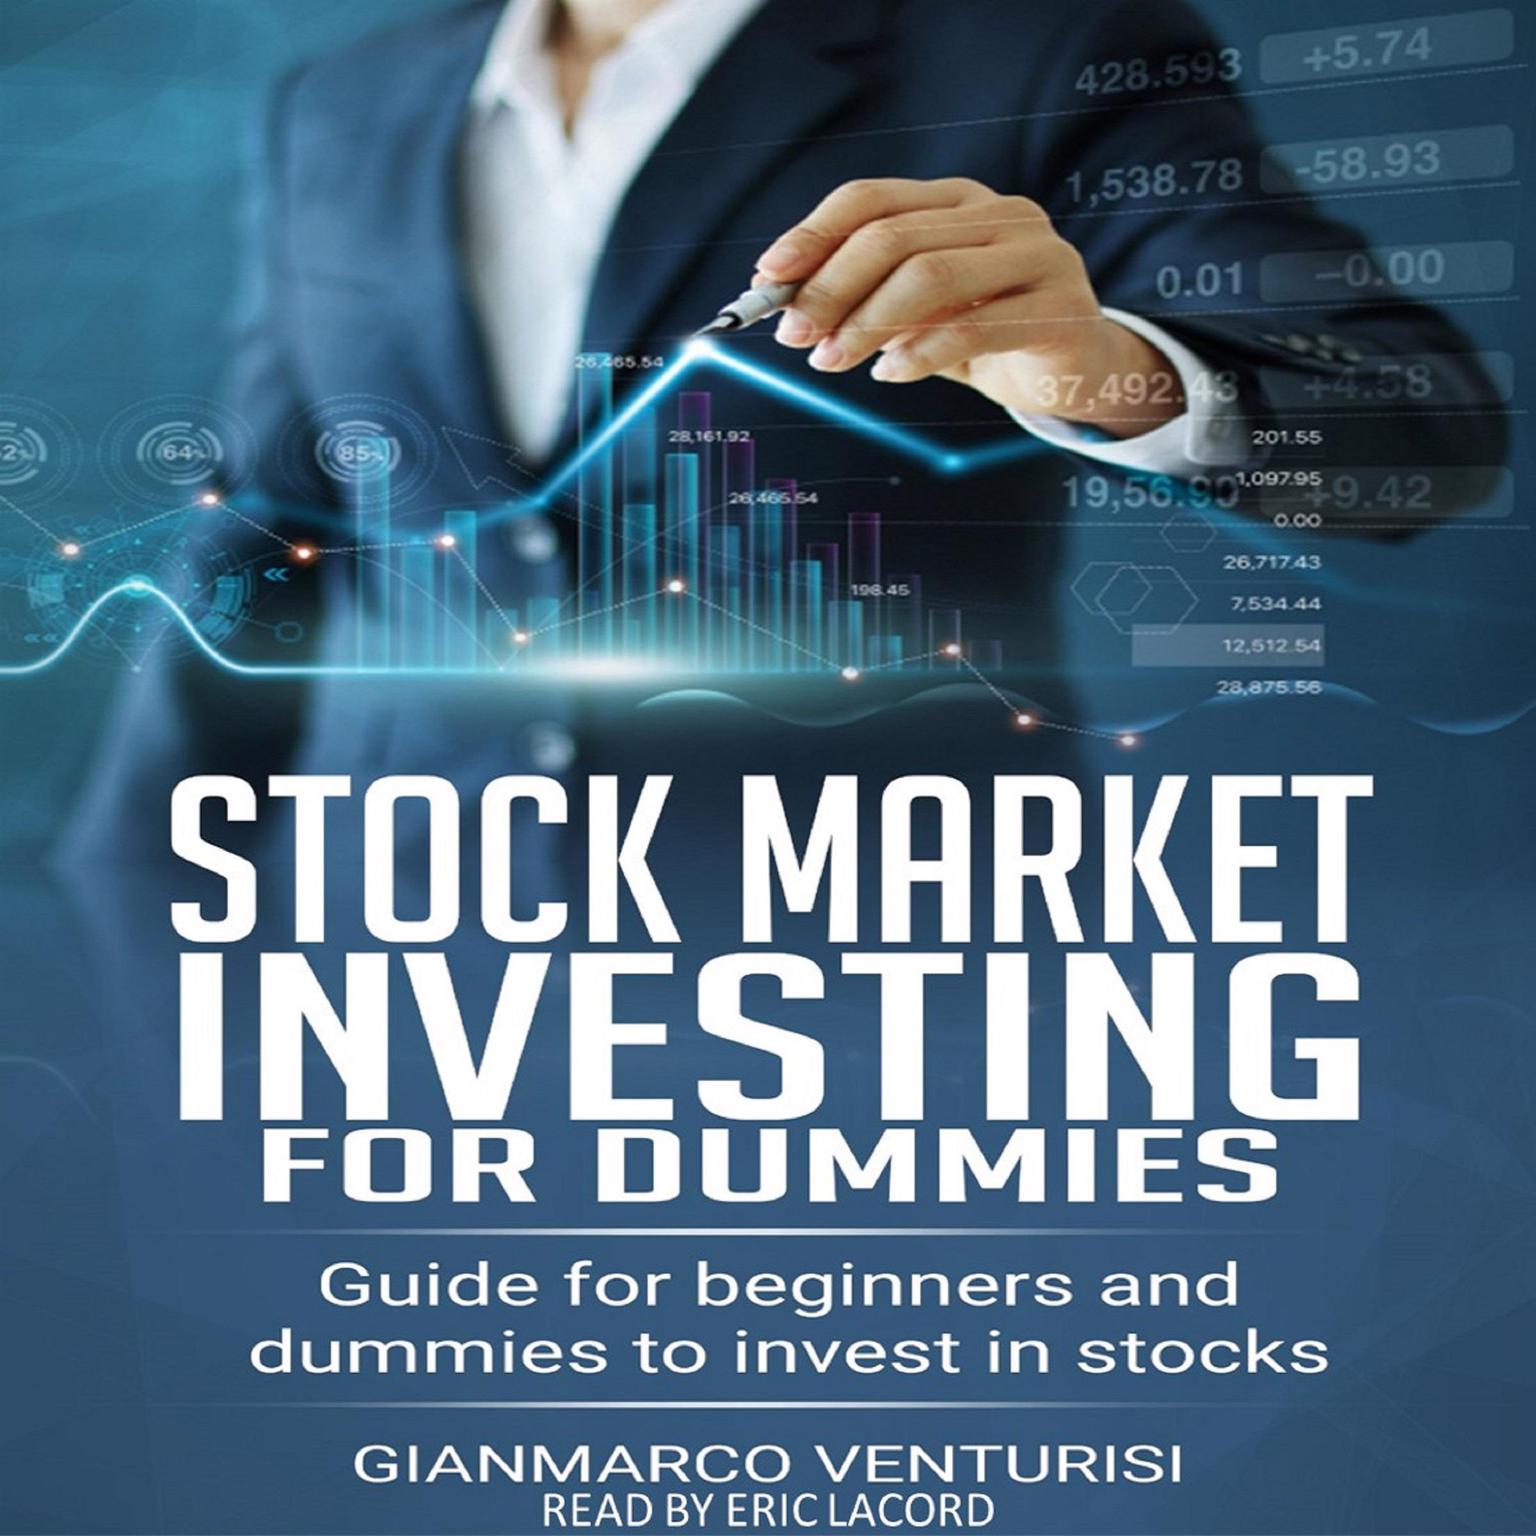 Stock Market Investing for Dummies: Guide for Beginners and Dummies to Invest in Stocks Audiobook, by Gianmarco Venturisi